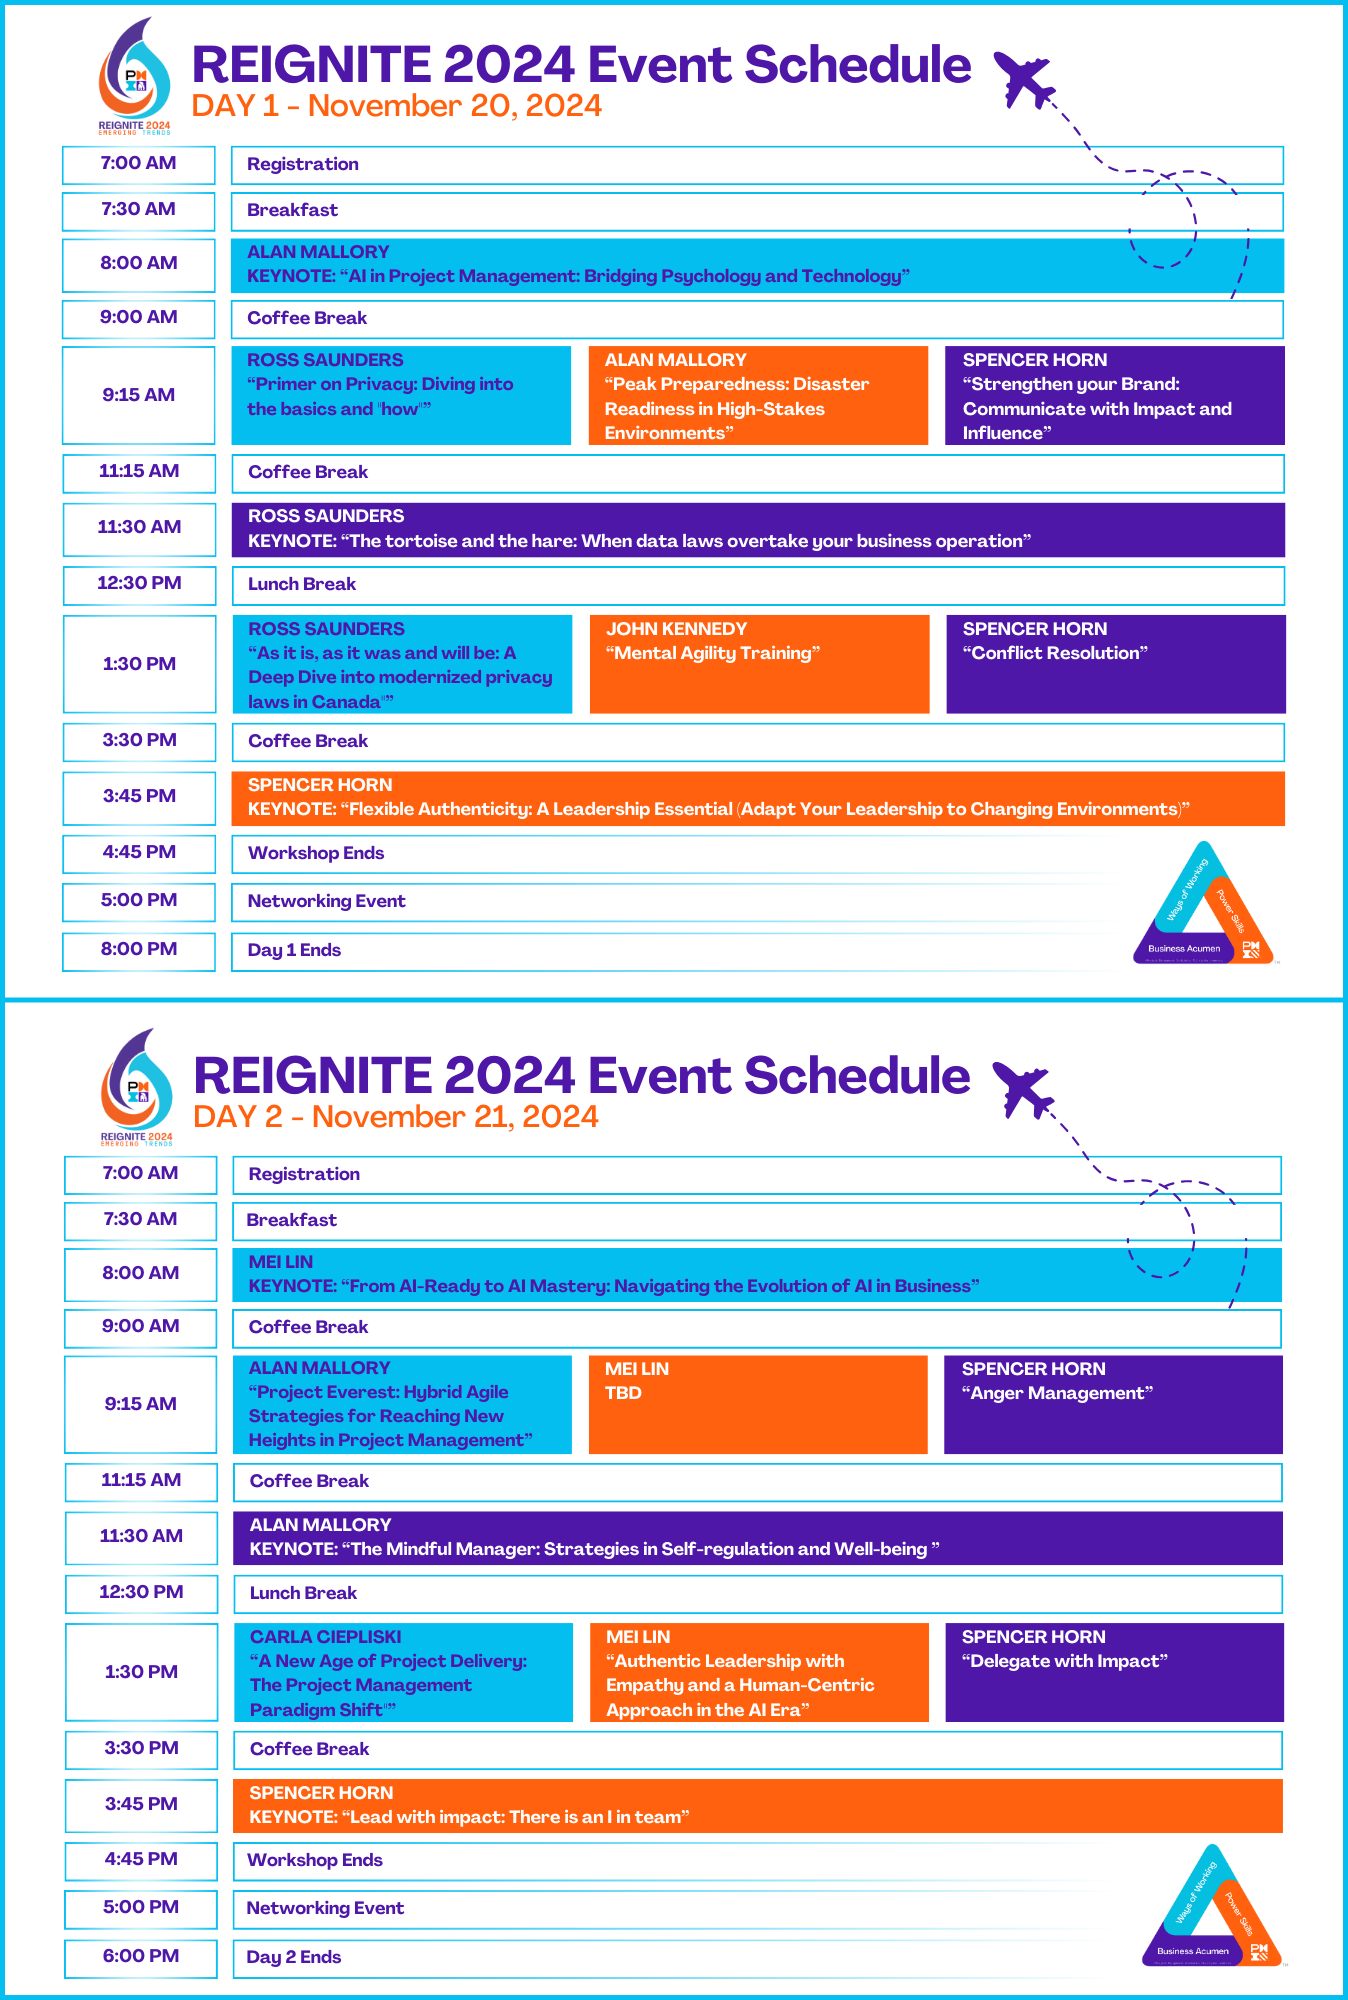 Reignite-2024---Event-Schedule-(1348-x-2000-px)-(2).png